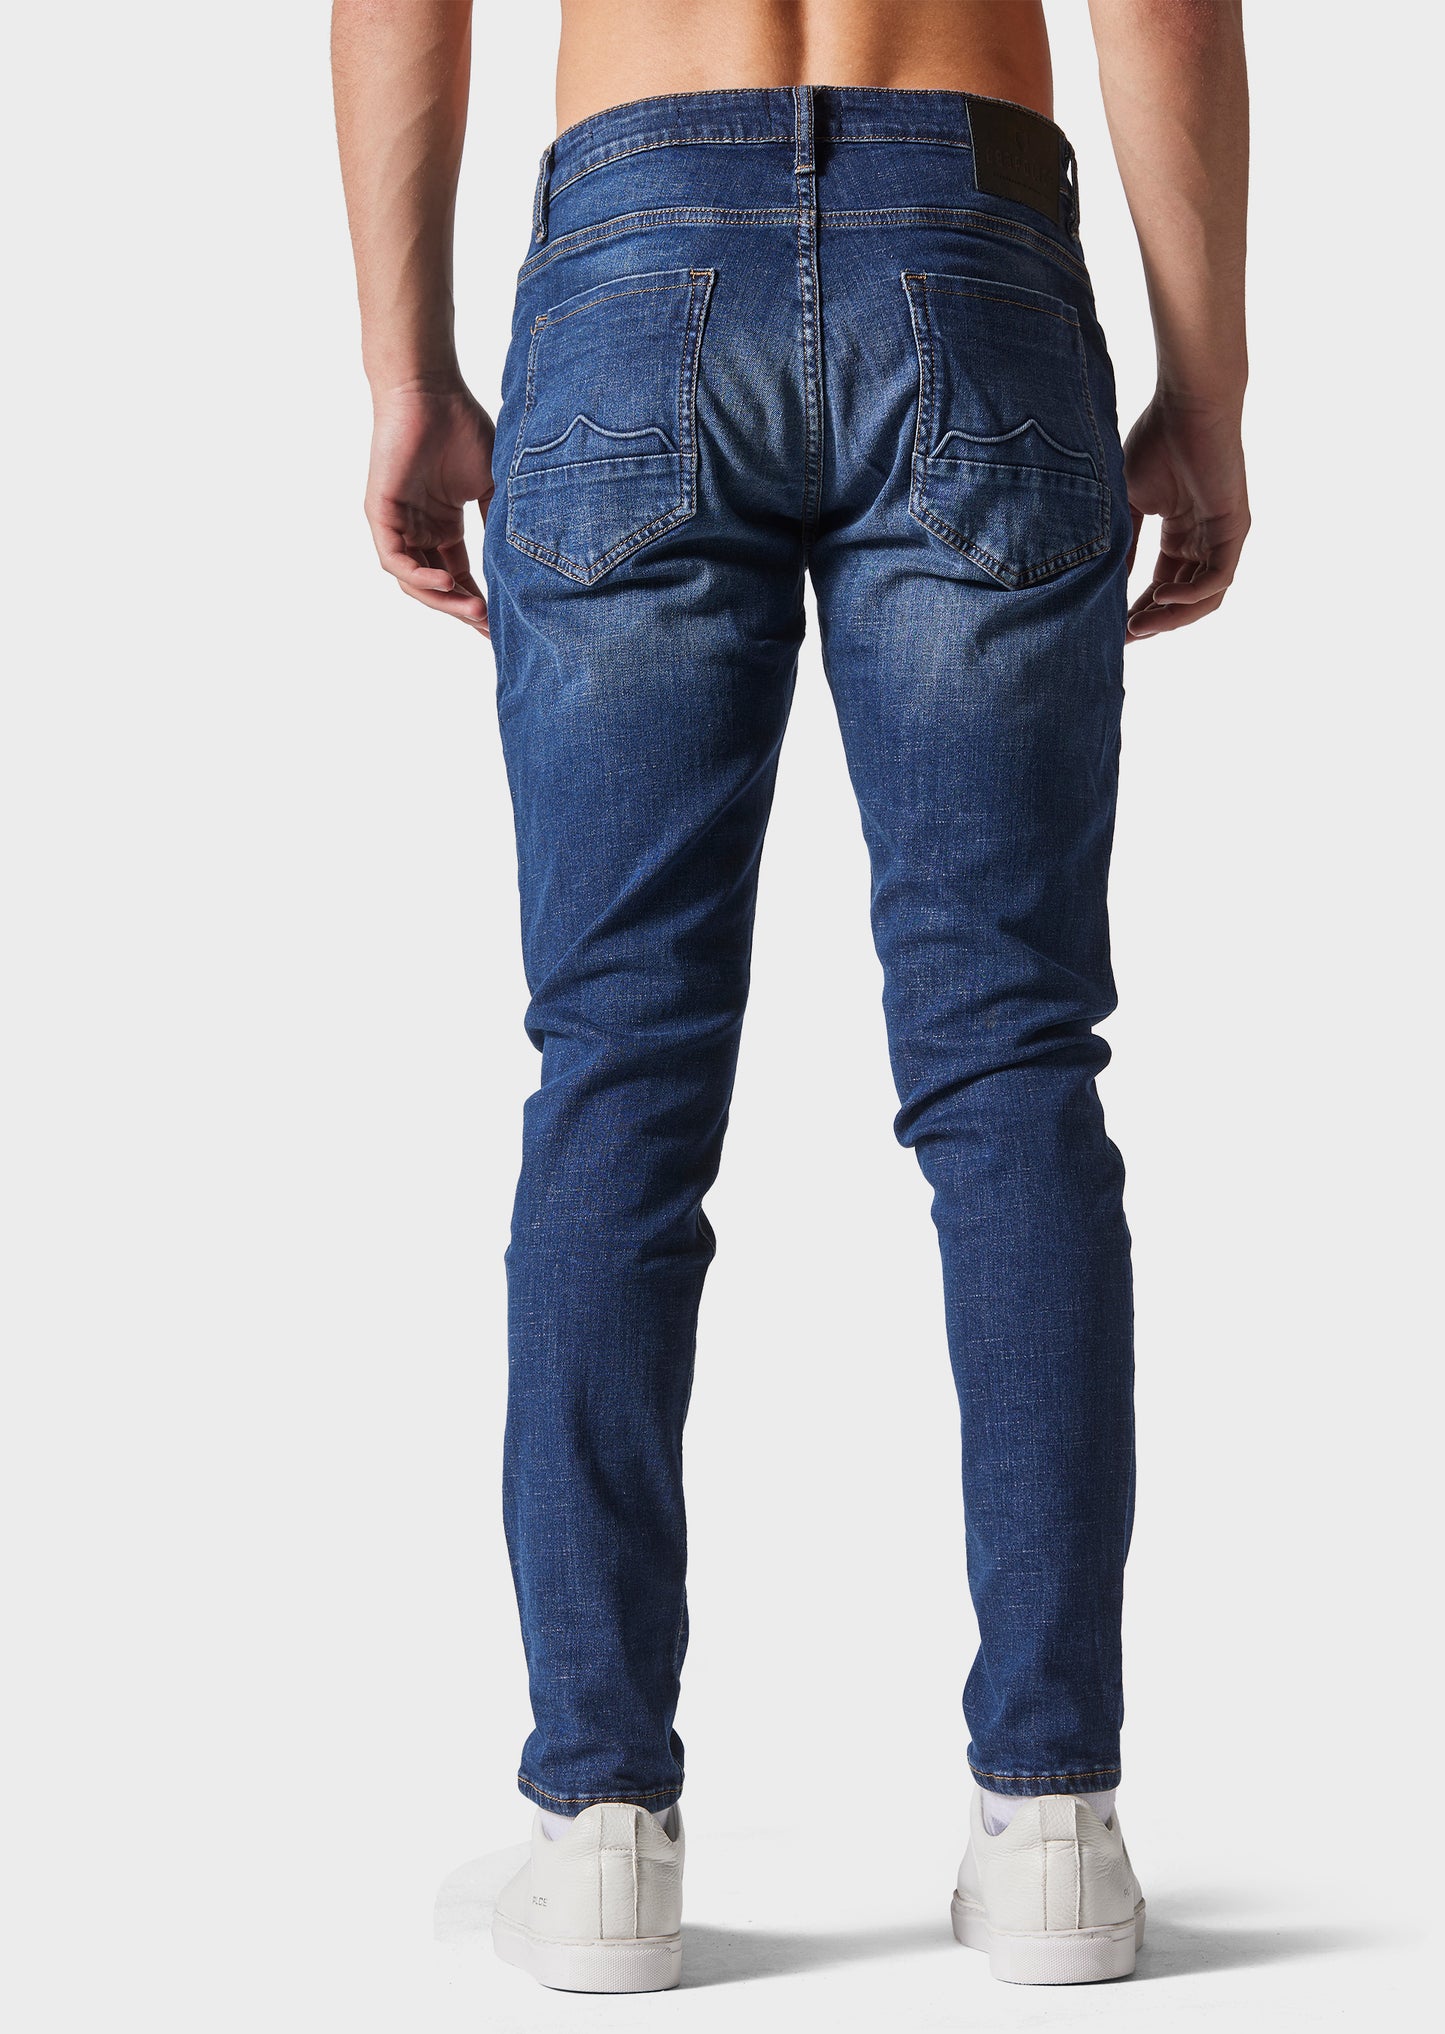 Moriarty COR 963W Blue Slim Fit Jeans